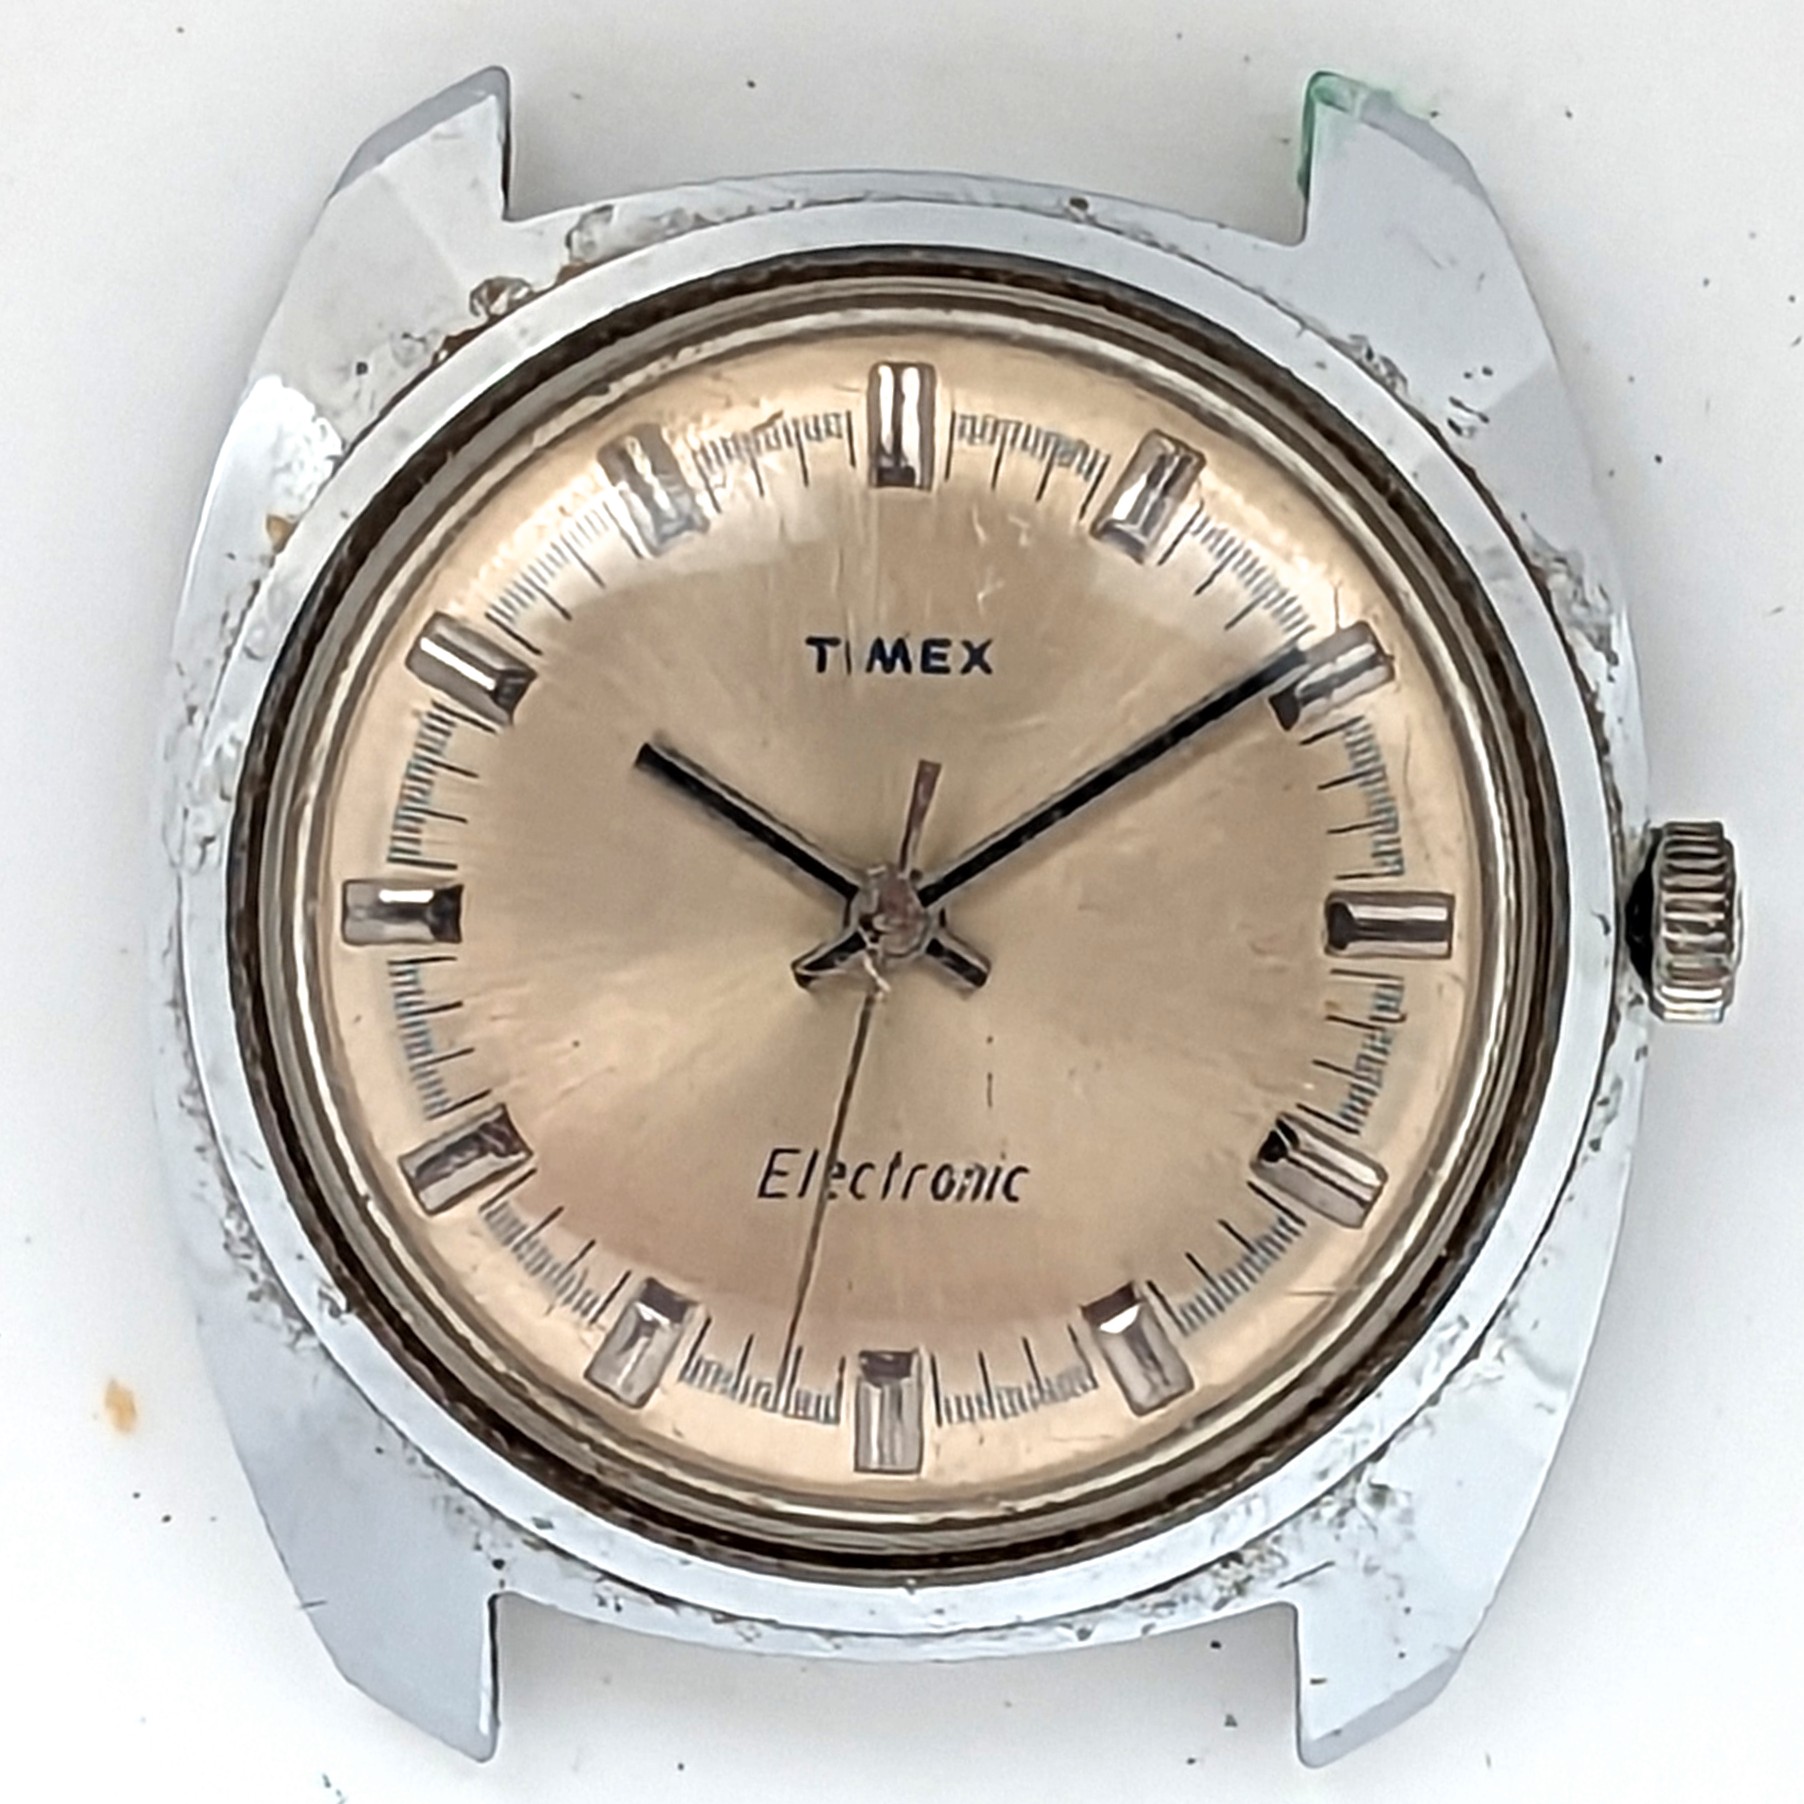 Timex Electronic 1974 Ref. 76250 25374